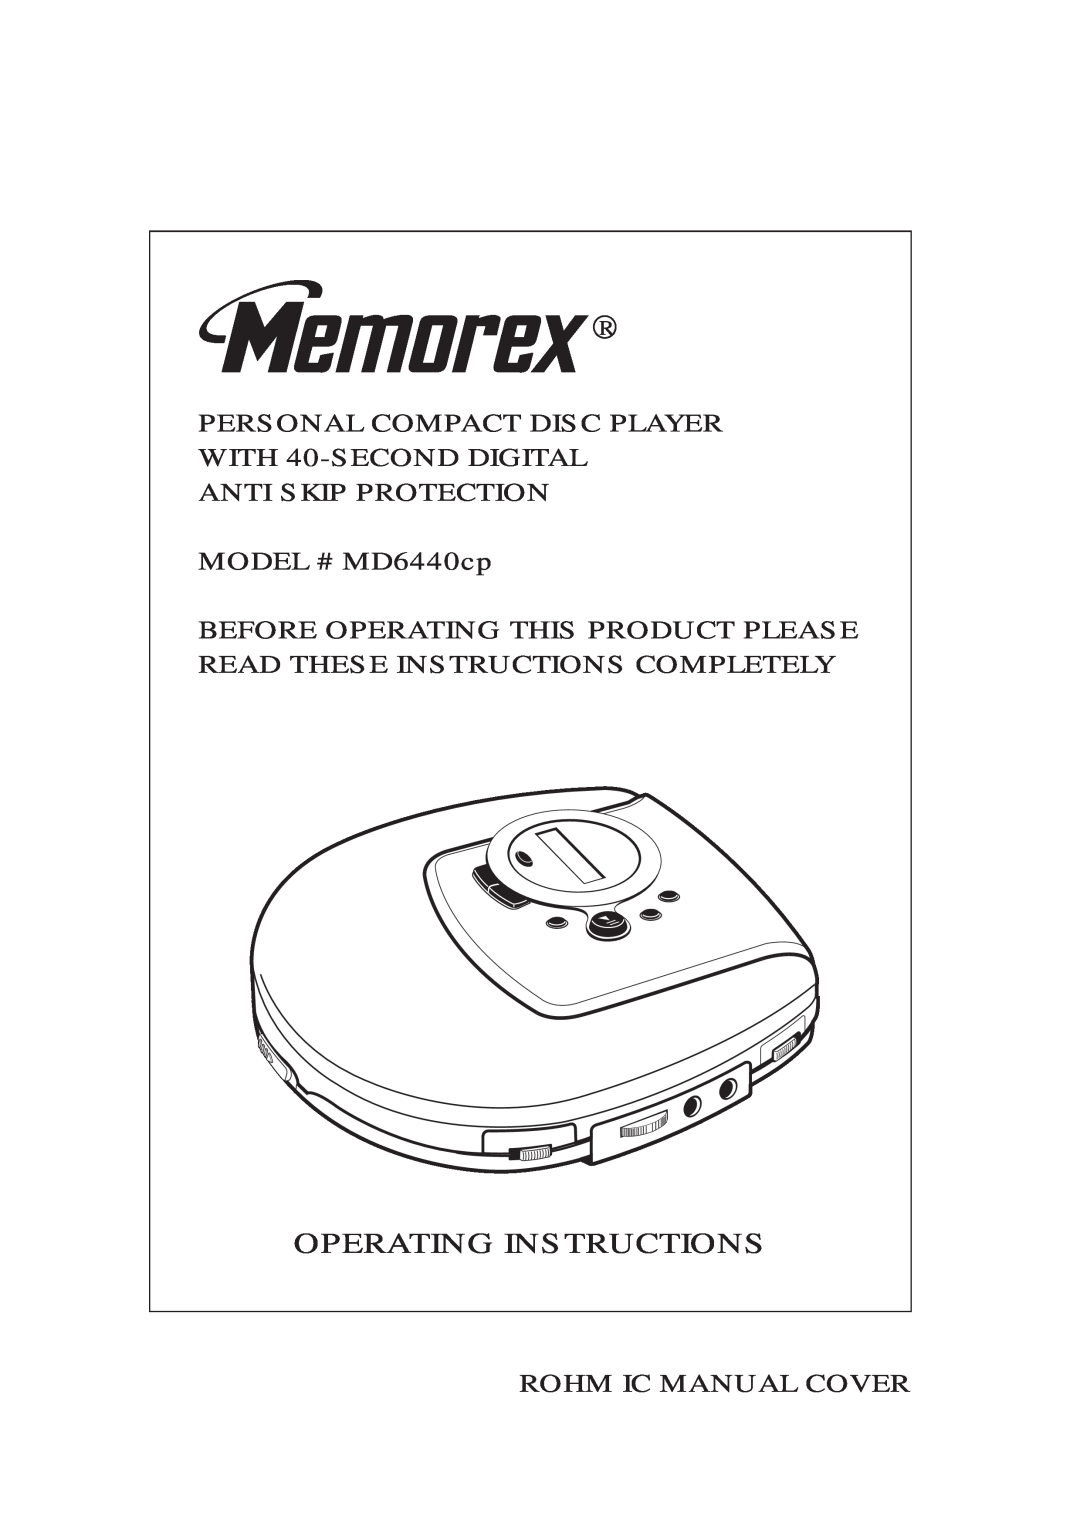 Memorex MD6440cp manual Operating Instructions, Personal Compact Disc Player, WITH 40-SECONDDIGITAL ANTI SKIP PROTECTION 